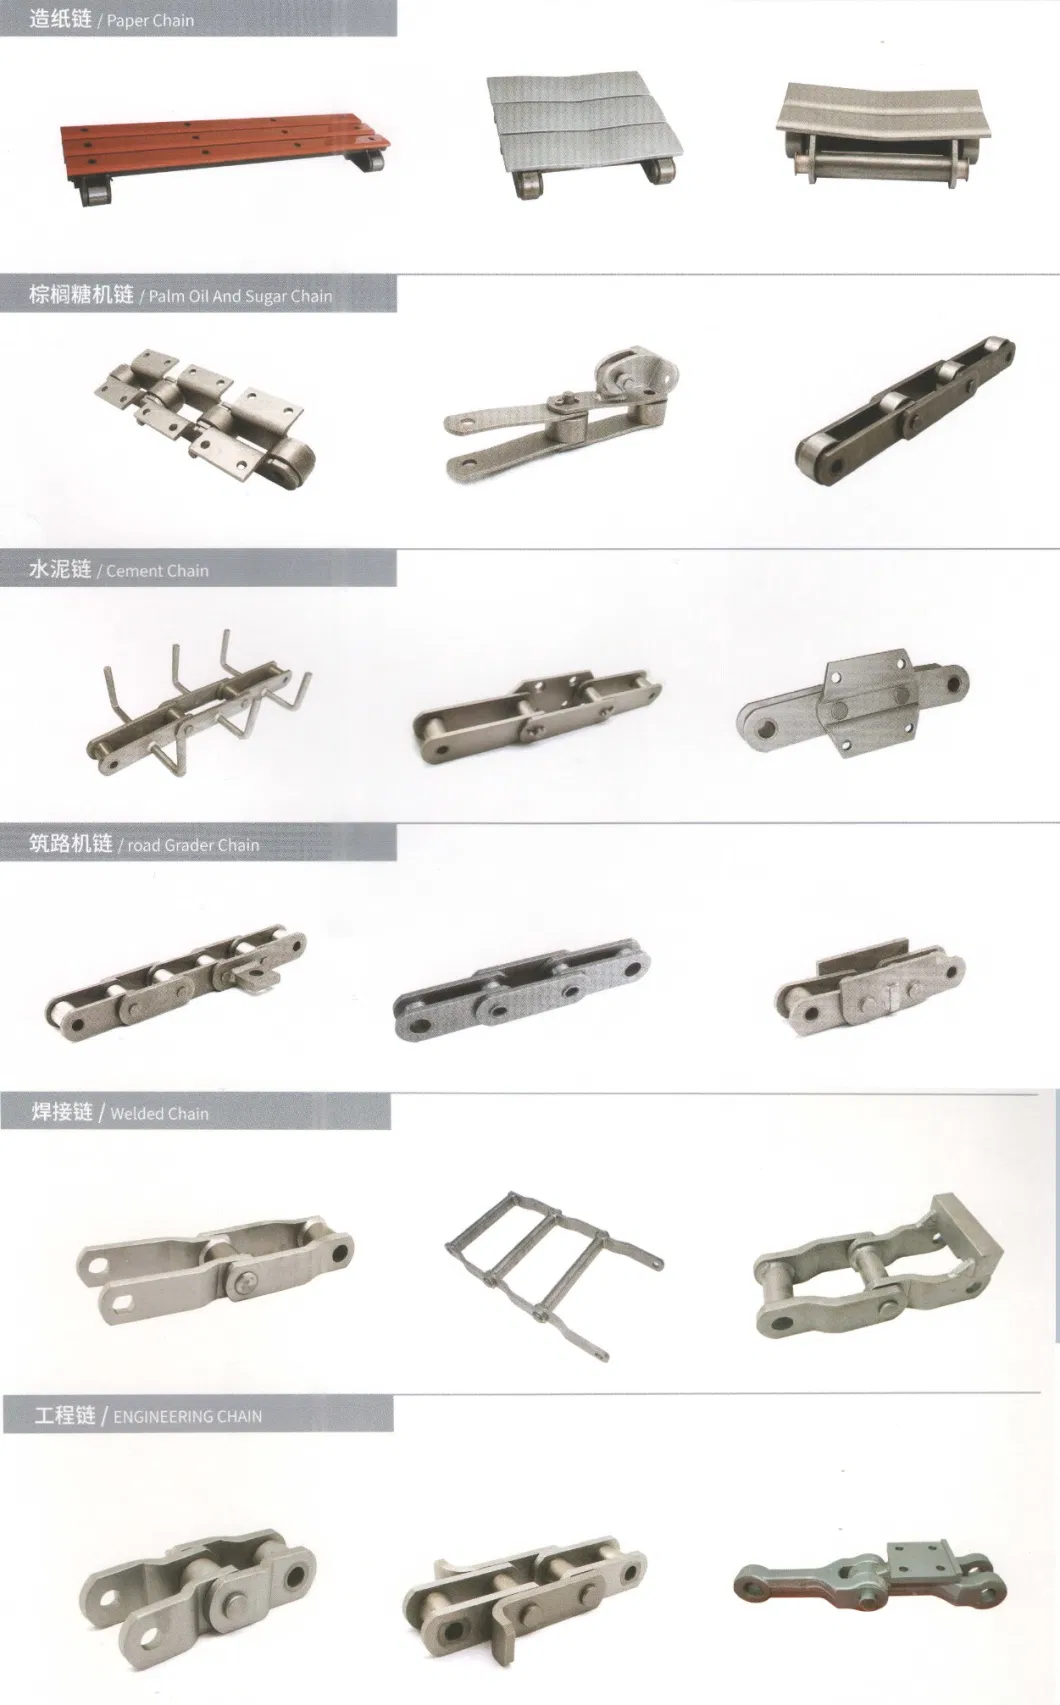 Conveyor Stainless Steel Conveyor Chains with Side Rollers